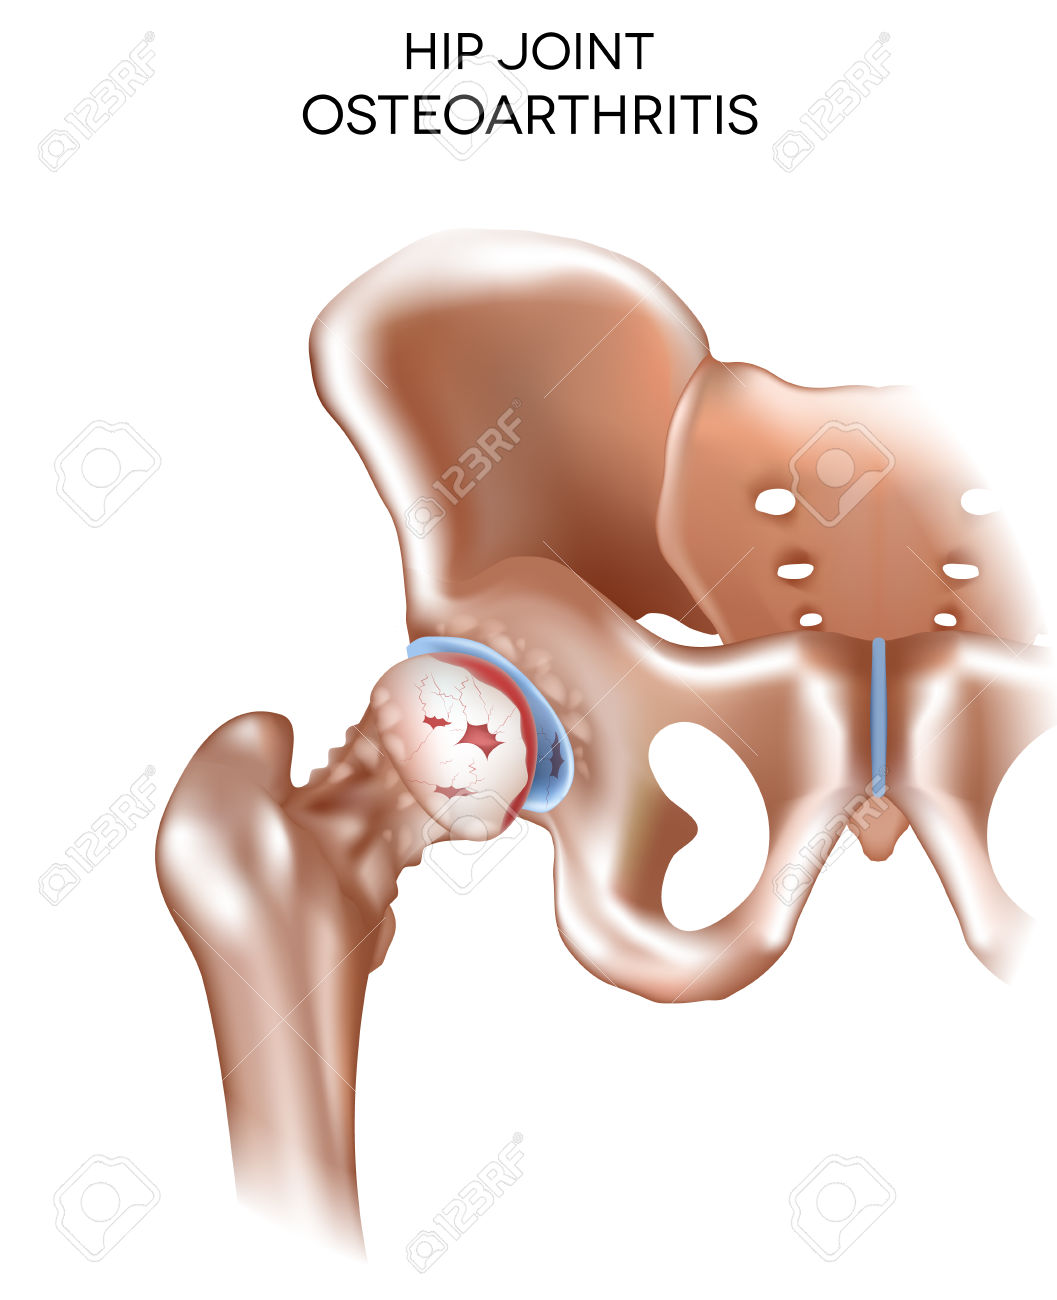 Arthritis Of The Hip Joint, Damaged Joint Cartilage And.